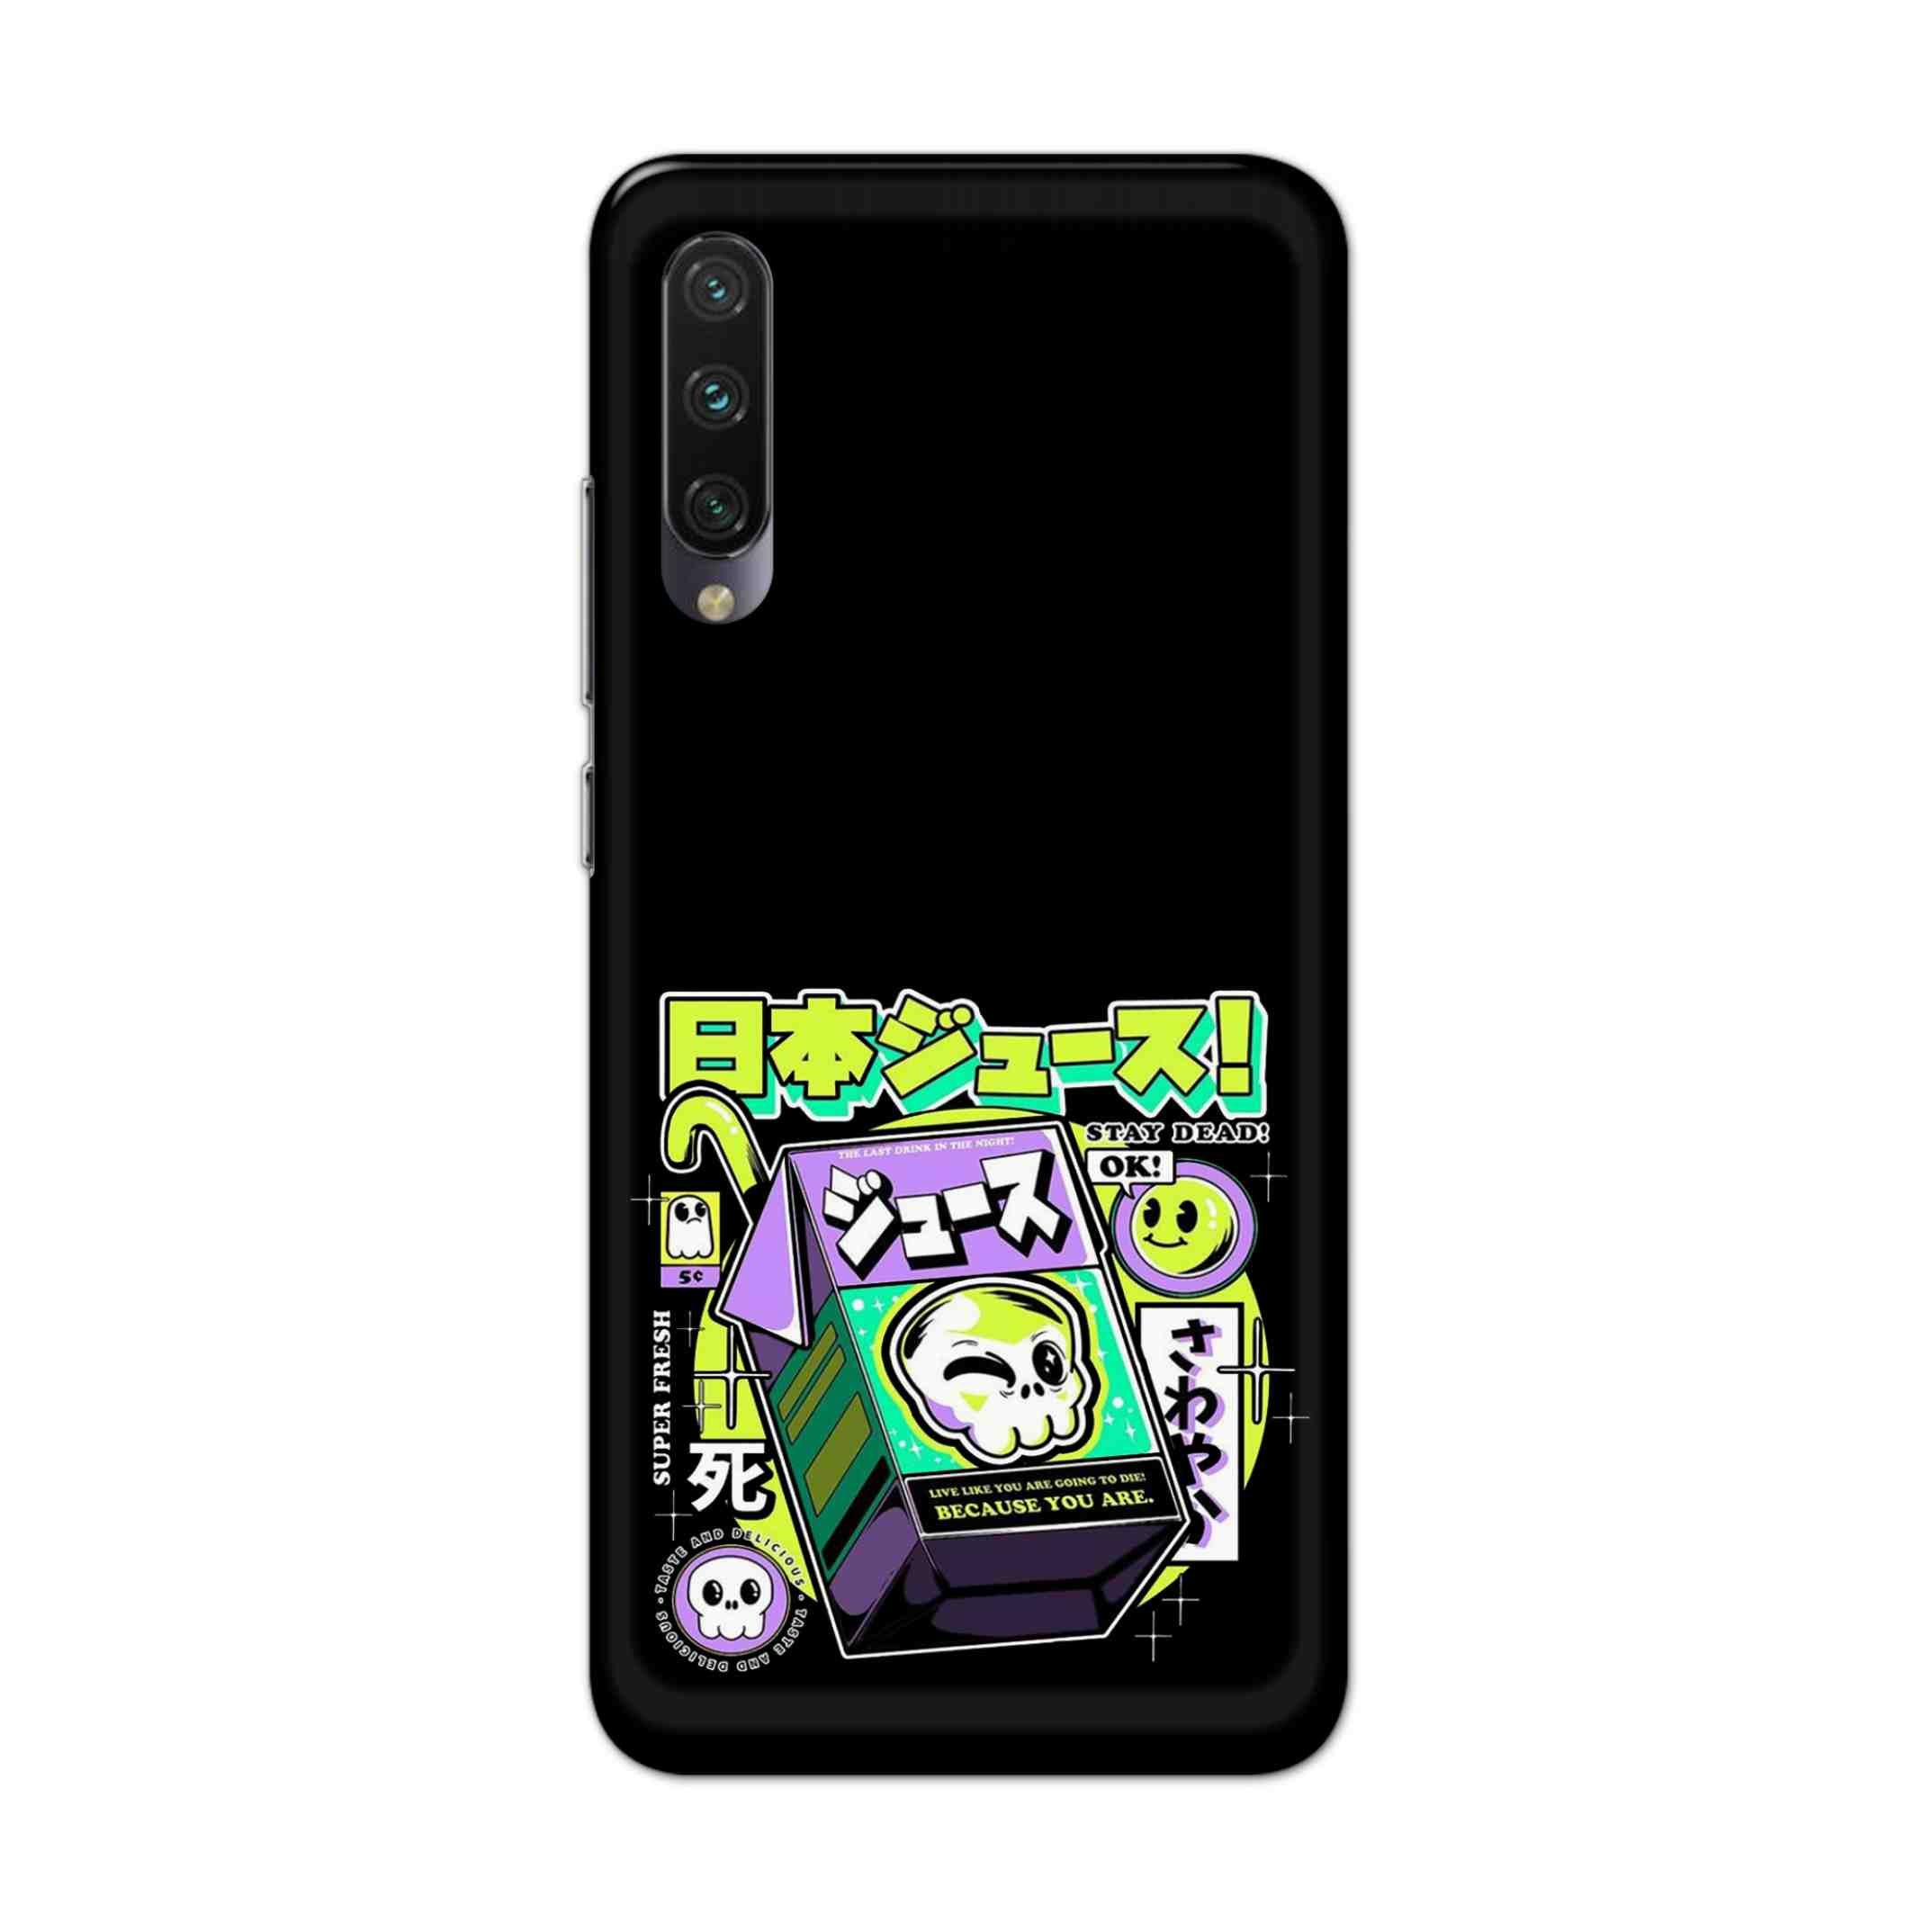 Buy Because You Are Hard Back Mobile Phone Case Cover For Xiaomi Mi A3 Online